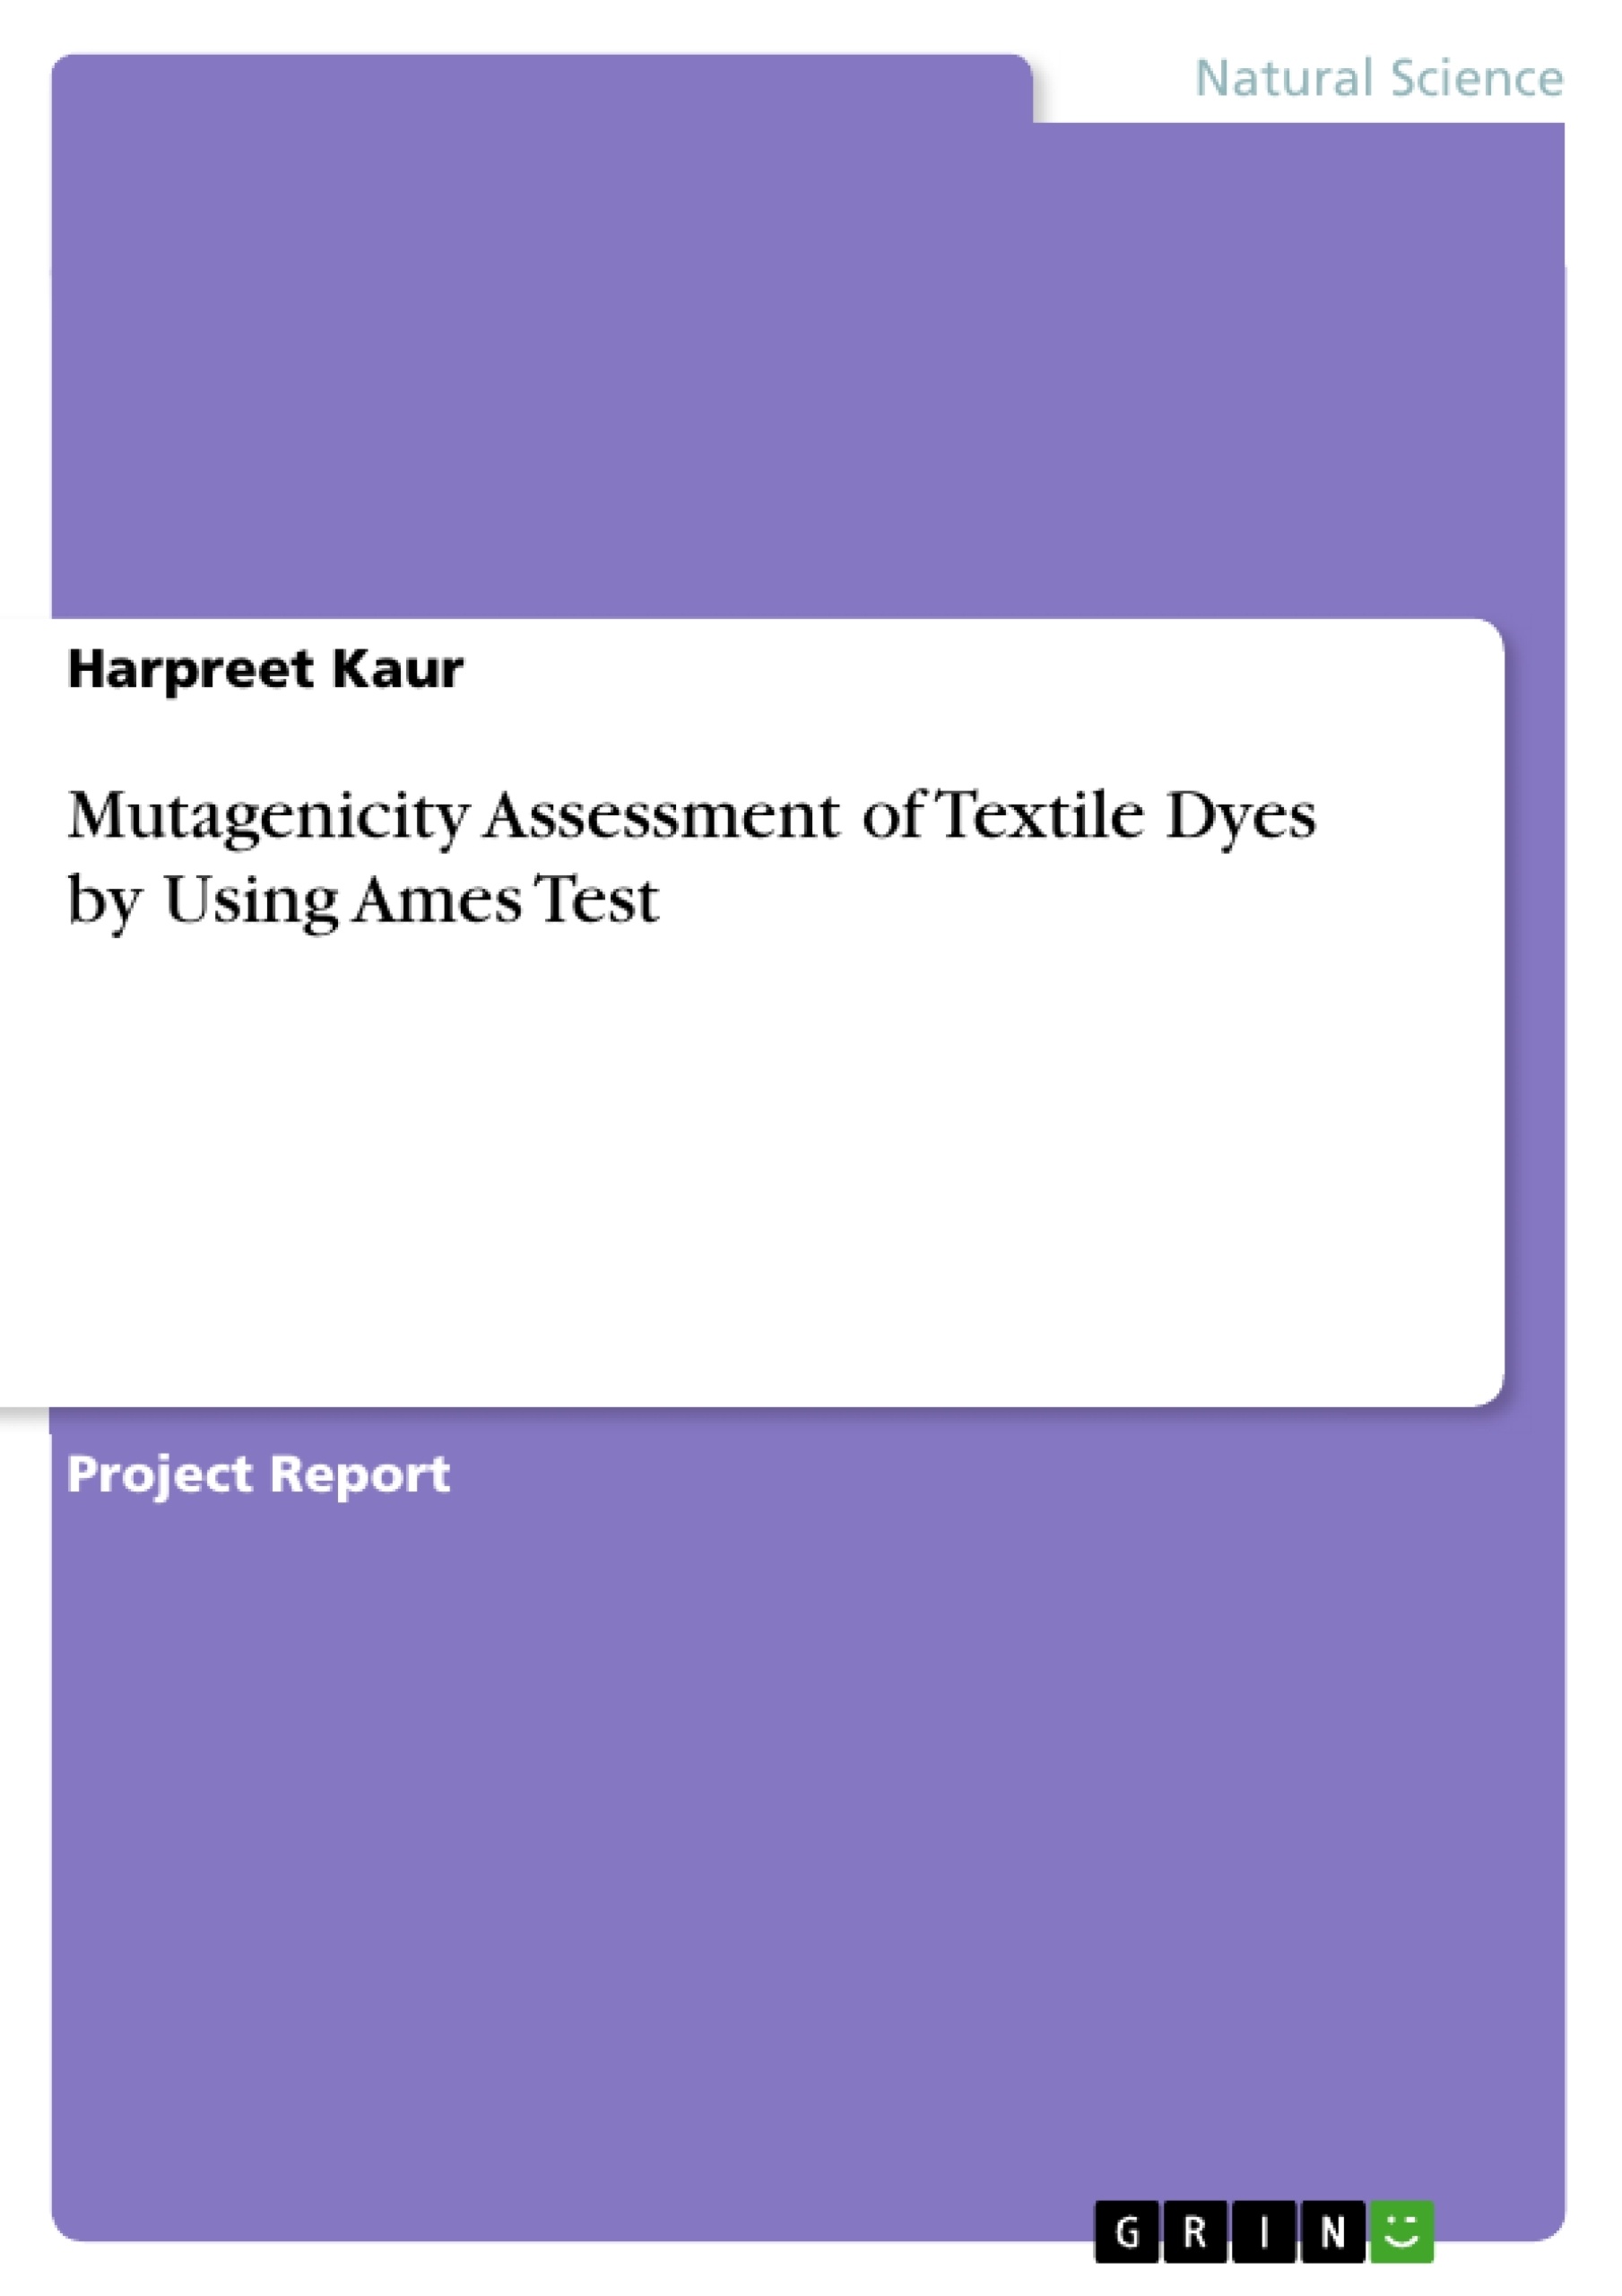 Title: Mutagenicity Assessment of Textile Dyes by Using Ames Test